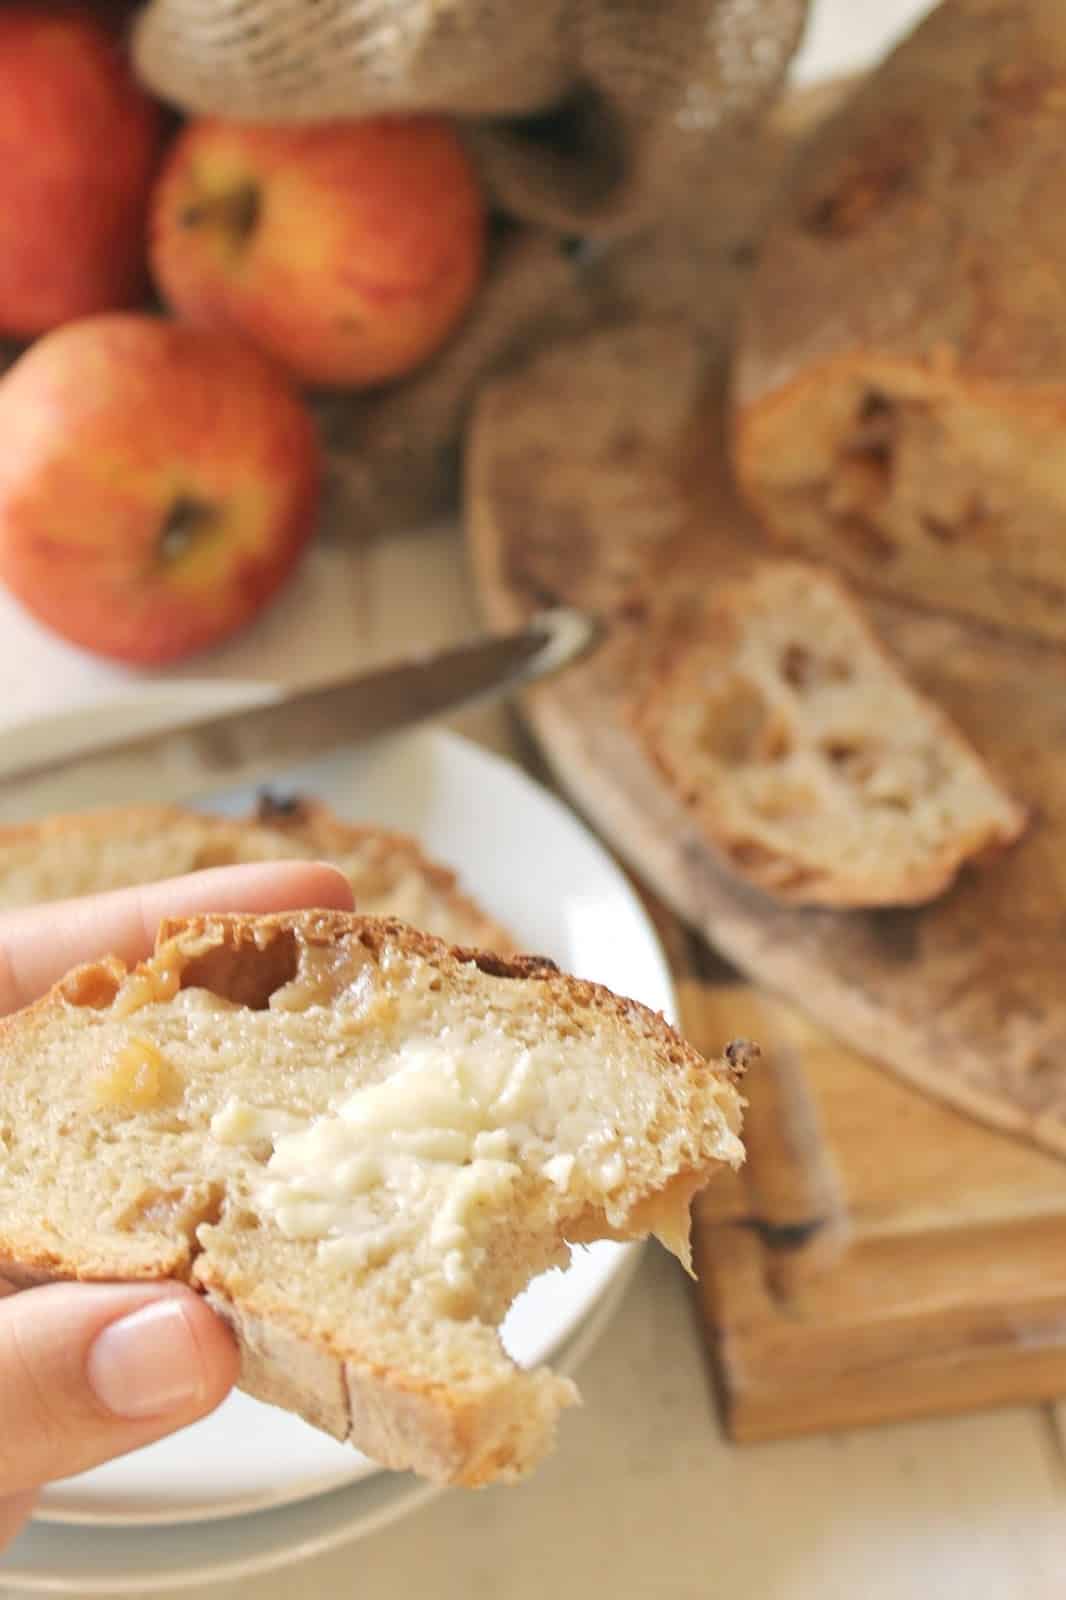 A hand holding a slice of buttered Roasted Apple Bread with a bite taken out of it.